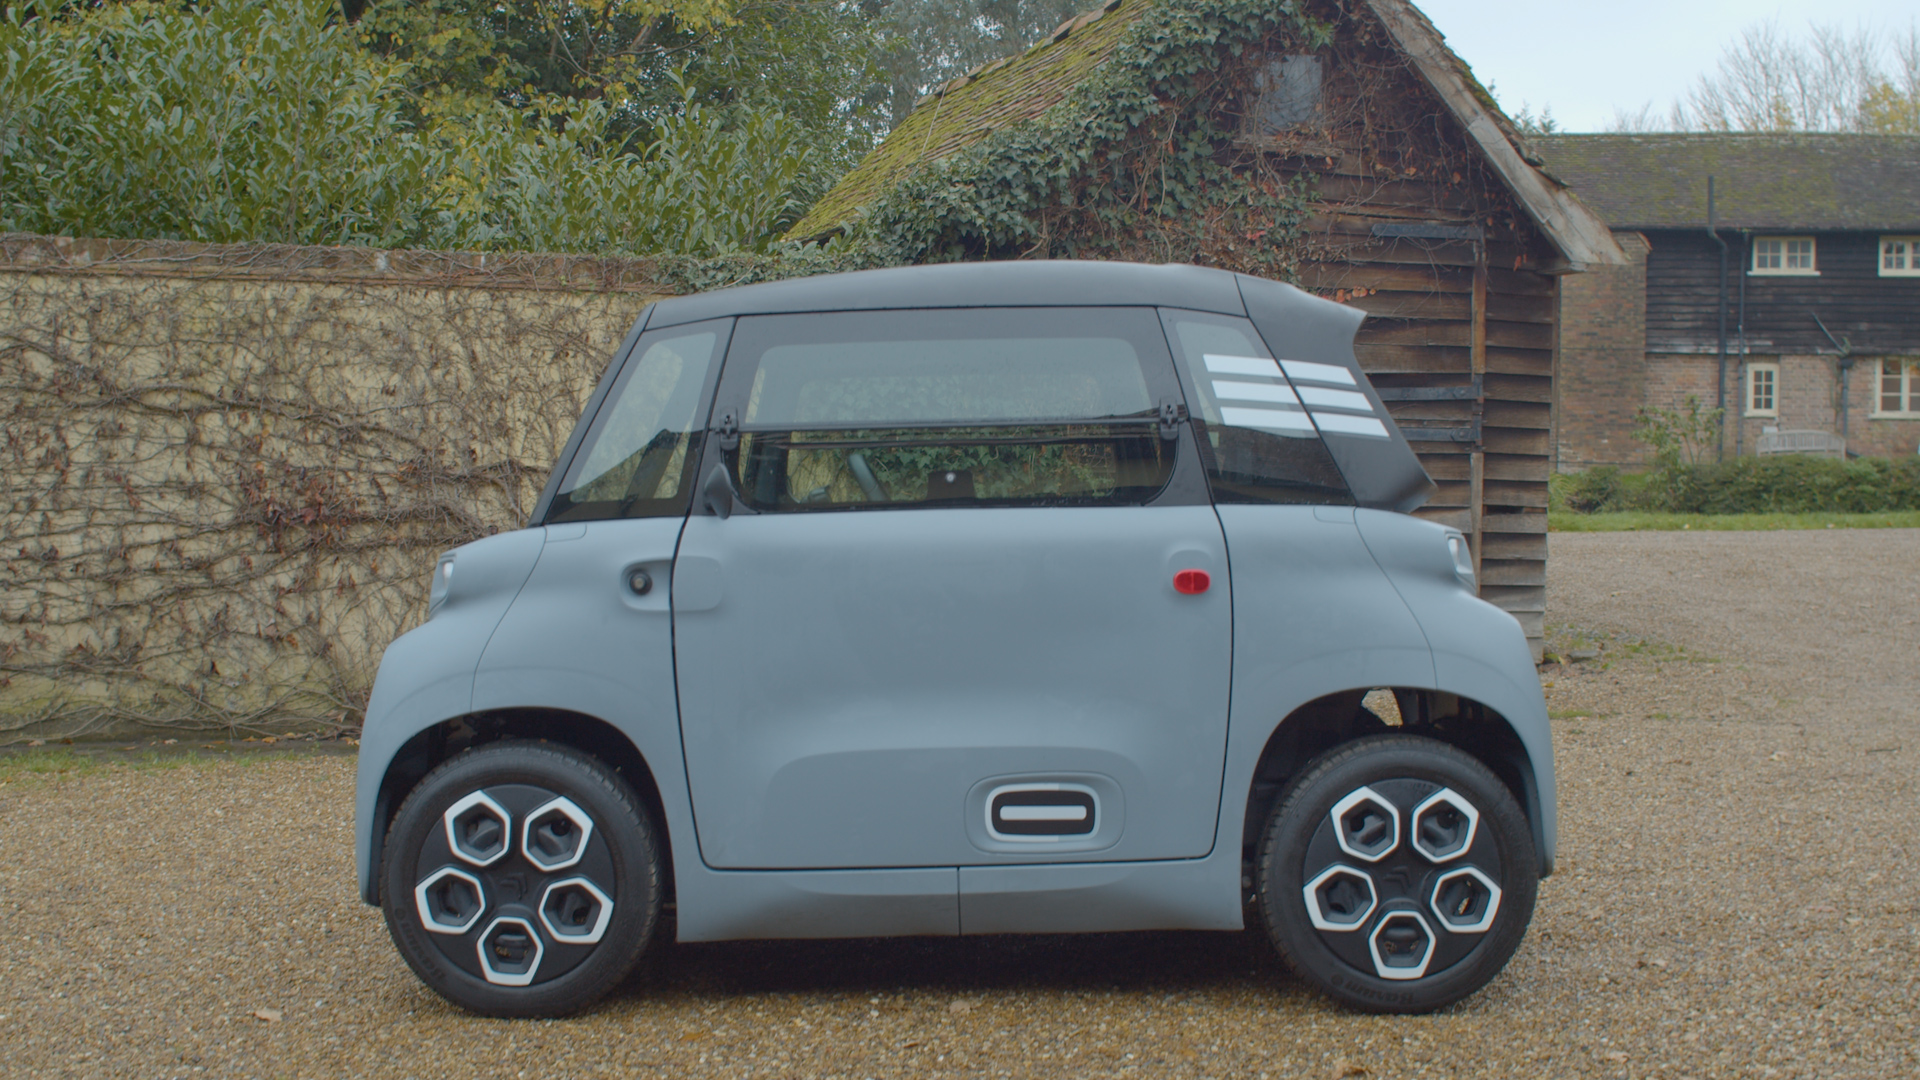 The Citroen Ami Cargo is a van for teenagers